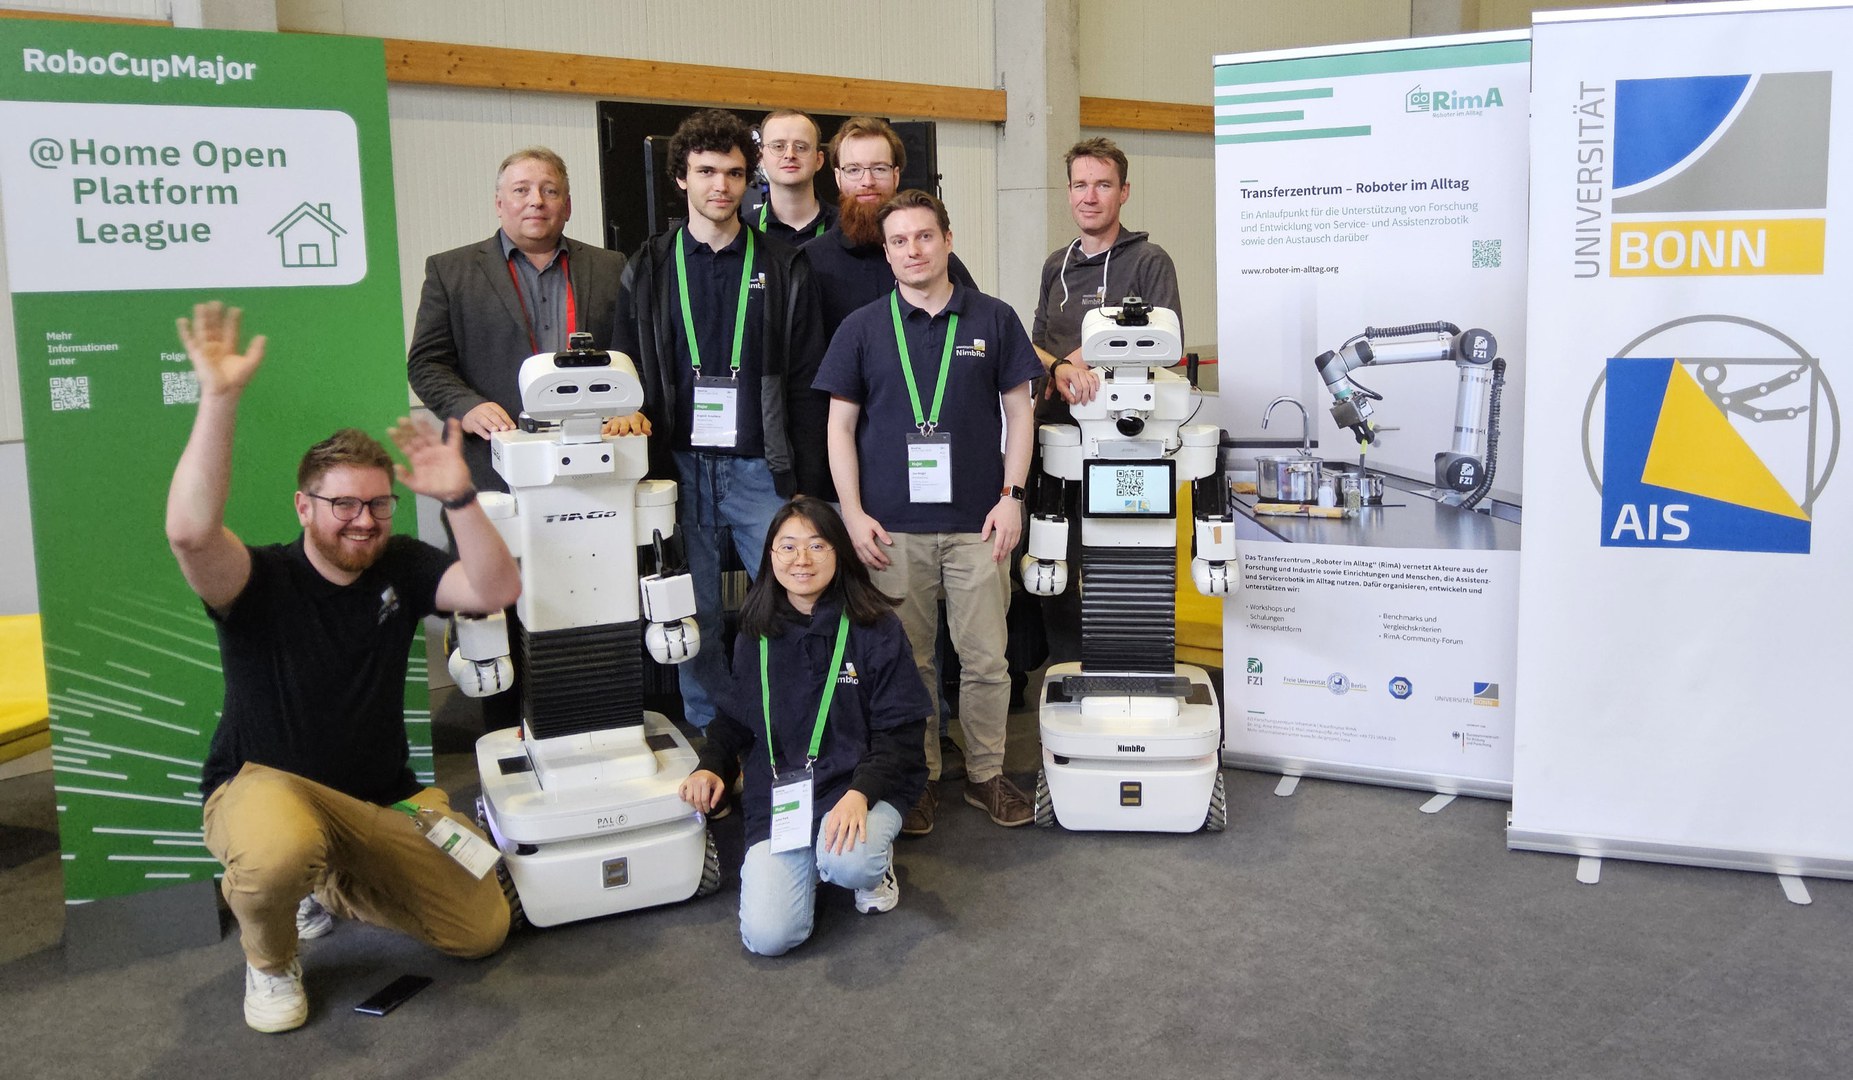 At the RoboCup German Open Championships in Kassel, the service robots of the NimbRo team from the University of Bonn achieved the highest score in the @Home league.